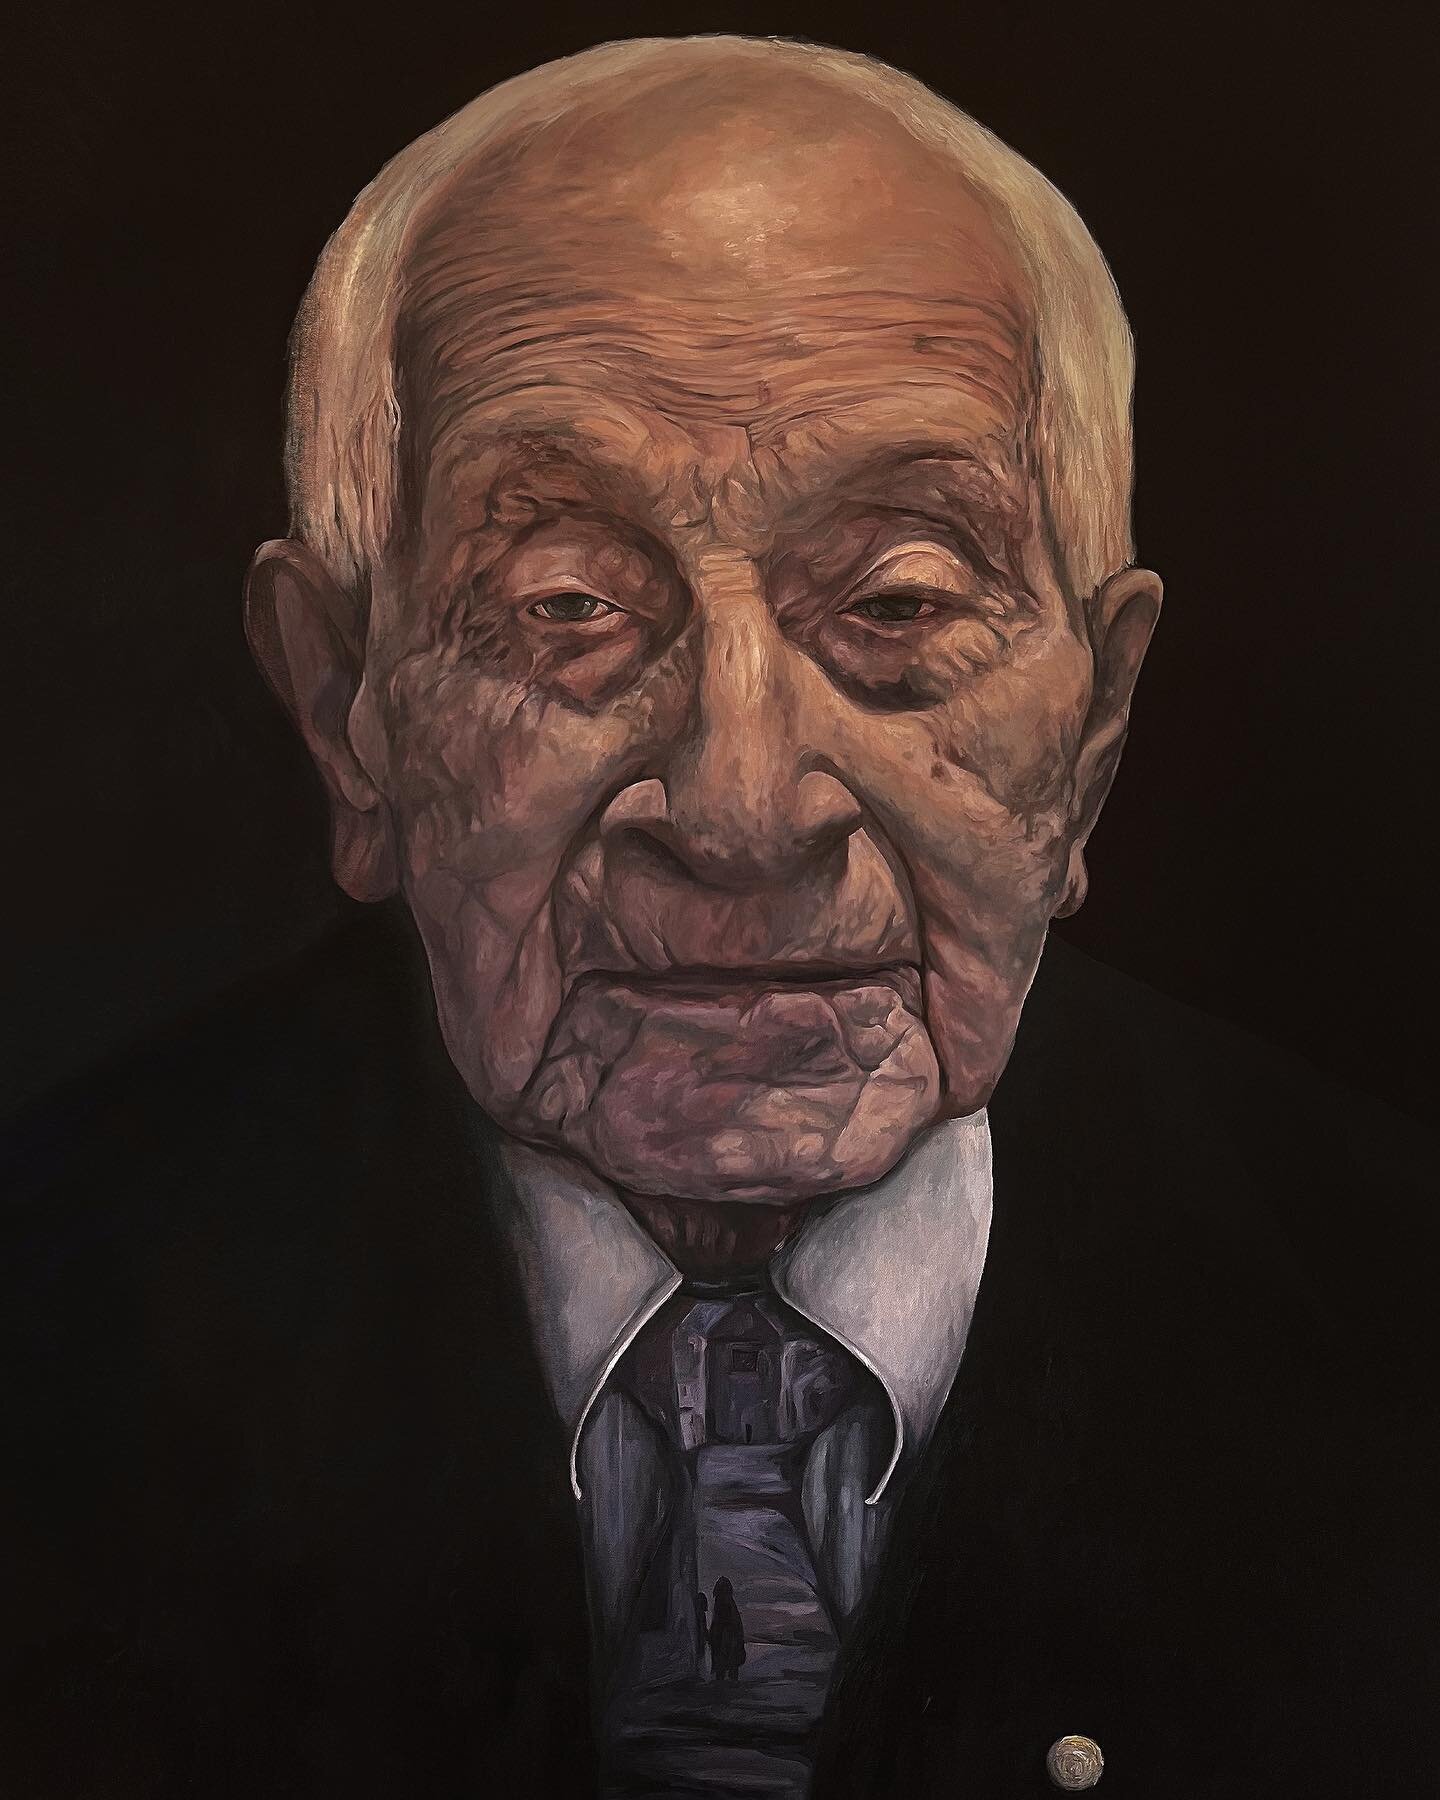 My painting: Mr Goldberg.
Oil on canvass 122x90

This was my most emotional and important portrait to date.
Abe is a Holocaust survivor who survived Auschwitz-Birkenau after around 50 of his family members were murdered.

Abe is a beautiful man. At 9